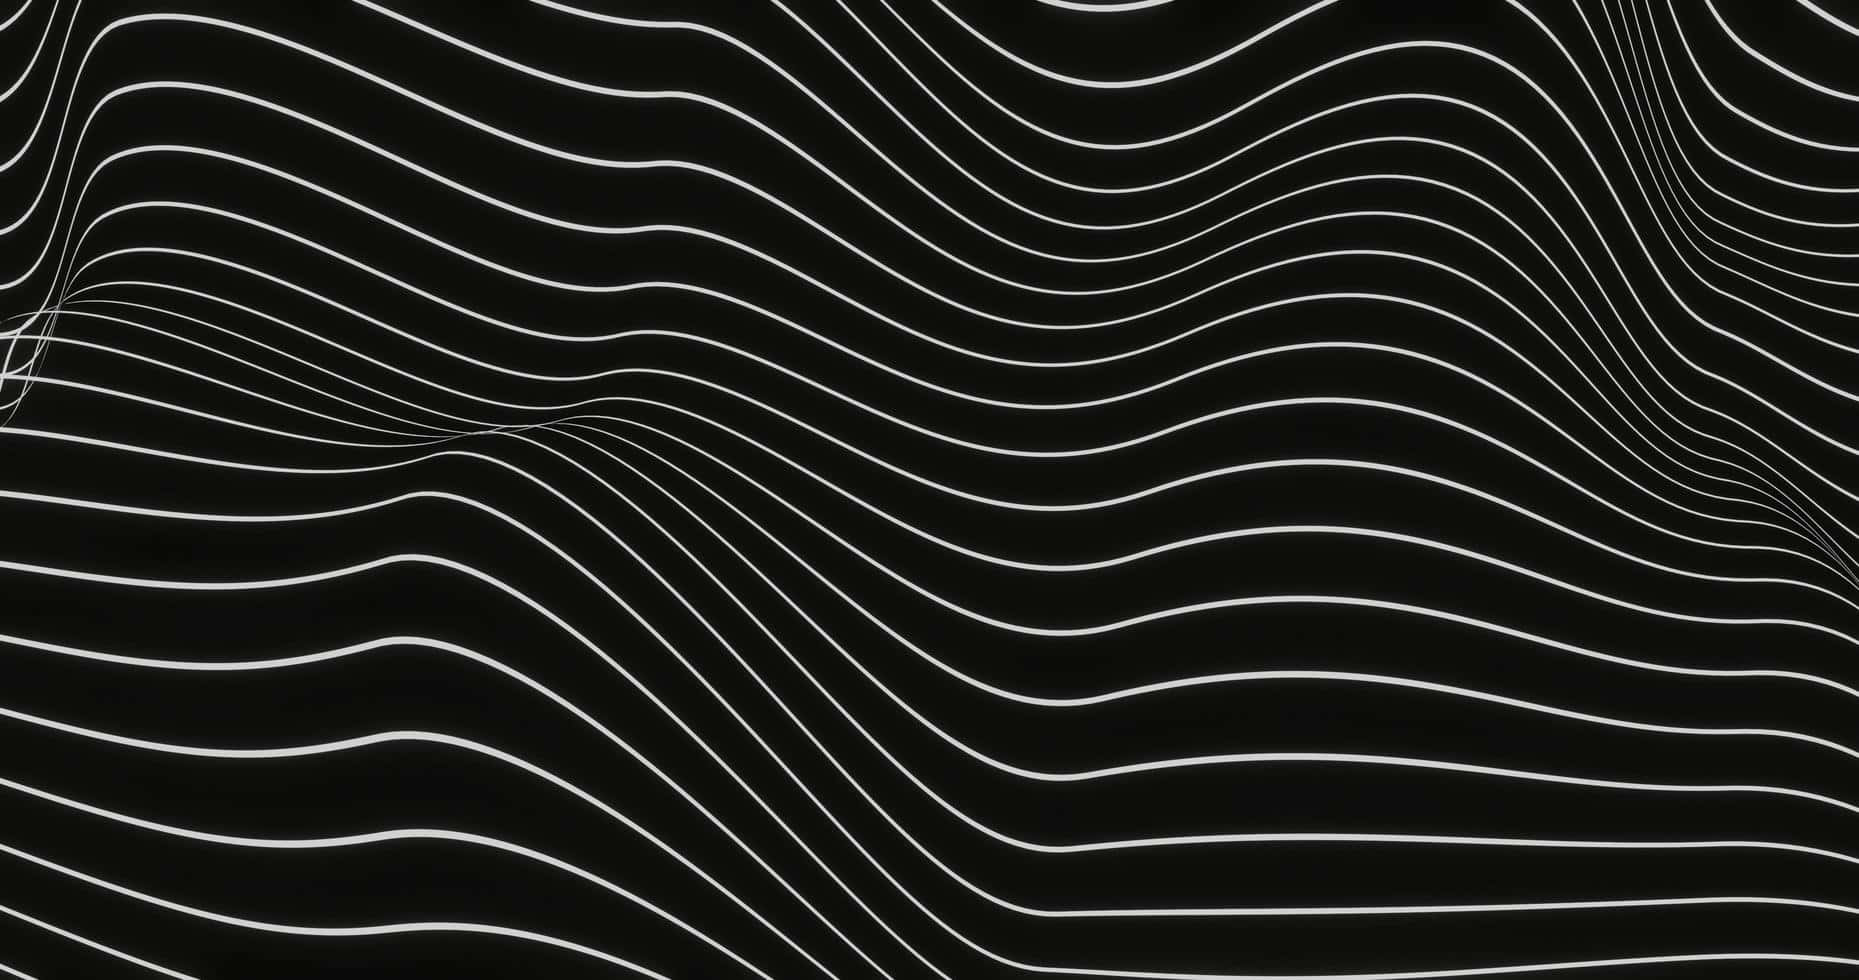 Abstract Blackand White Wave Lines Wallpaper